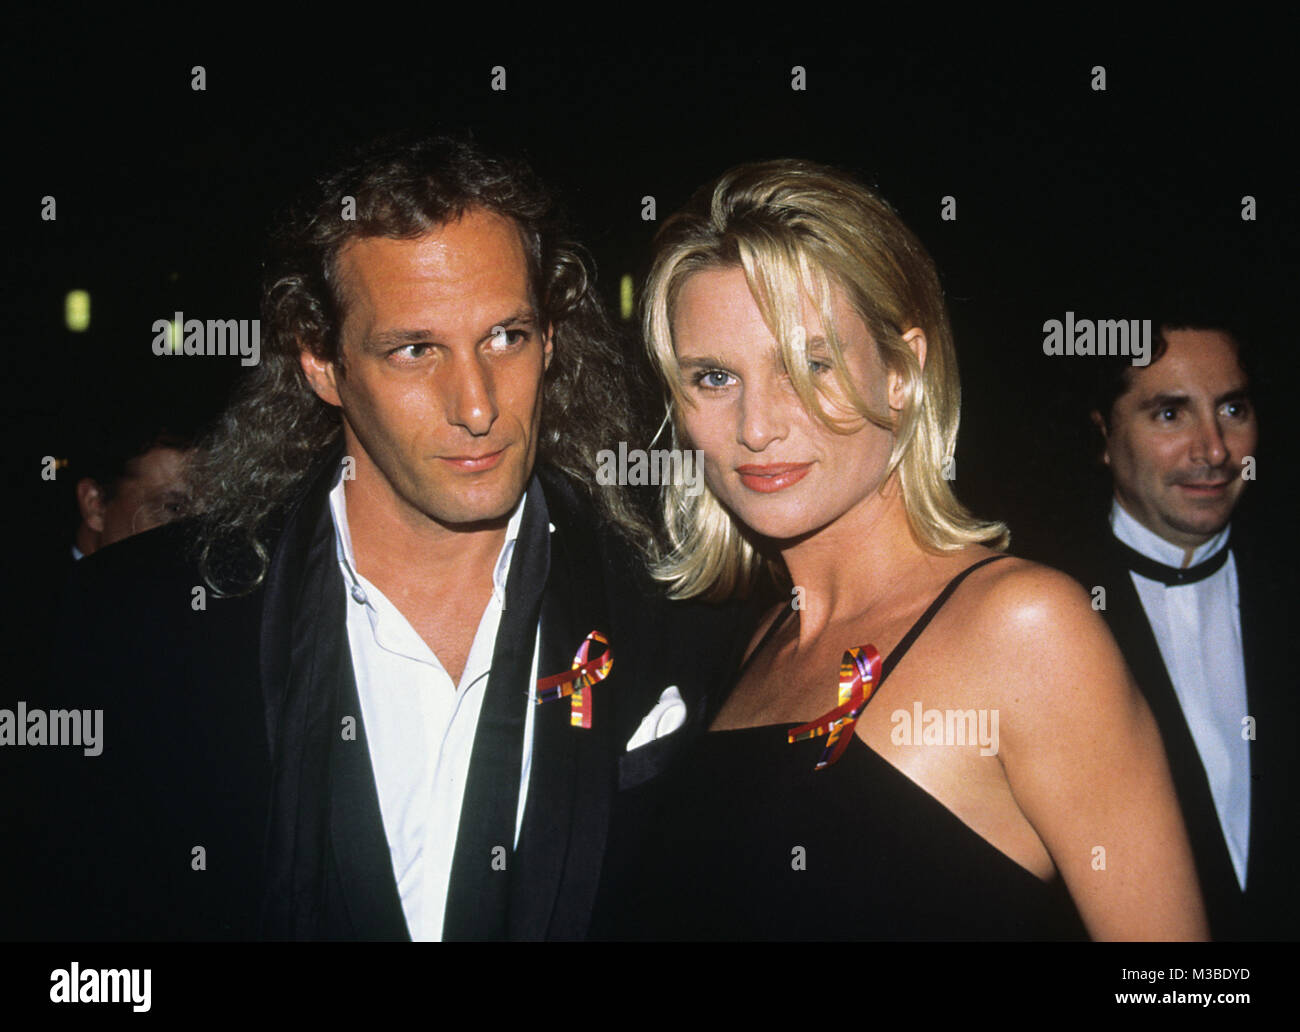 Michael Bolton and Nicollette Sheridan pictured at the Essence Magazine awards at the Paramount Theatre in New York City on May 12, 1995.  Credit: Walter McBride/MediaPunch Stock Photo